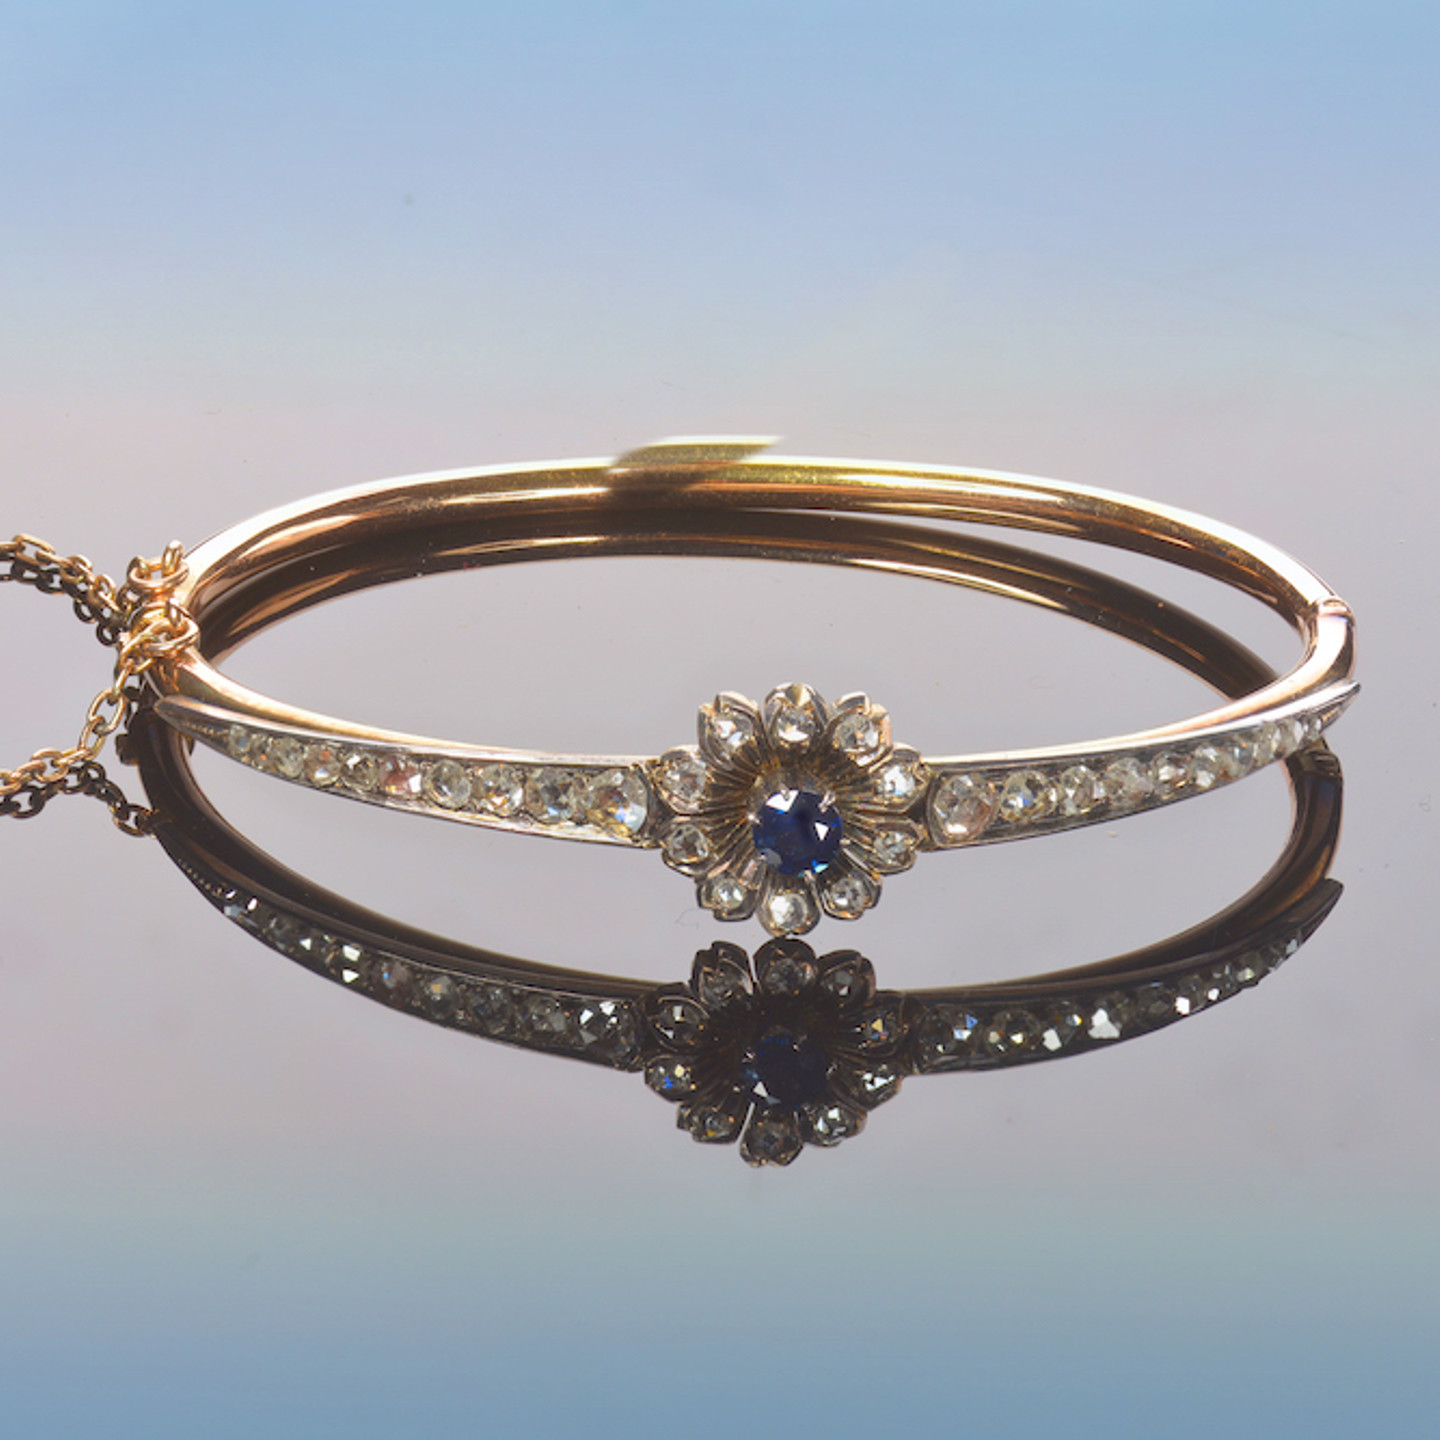 An Early Victorian Gold Bangle Set With A Round Cut Sapphire And Rose Cut Diamonds. Sold For £1,300